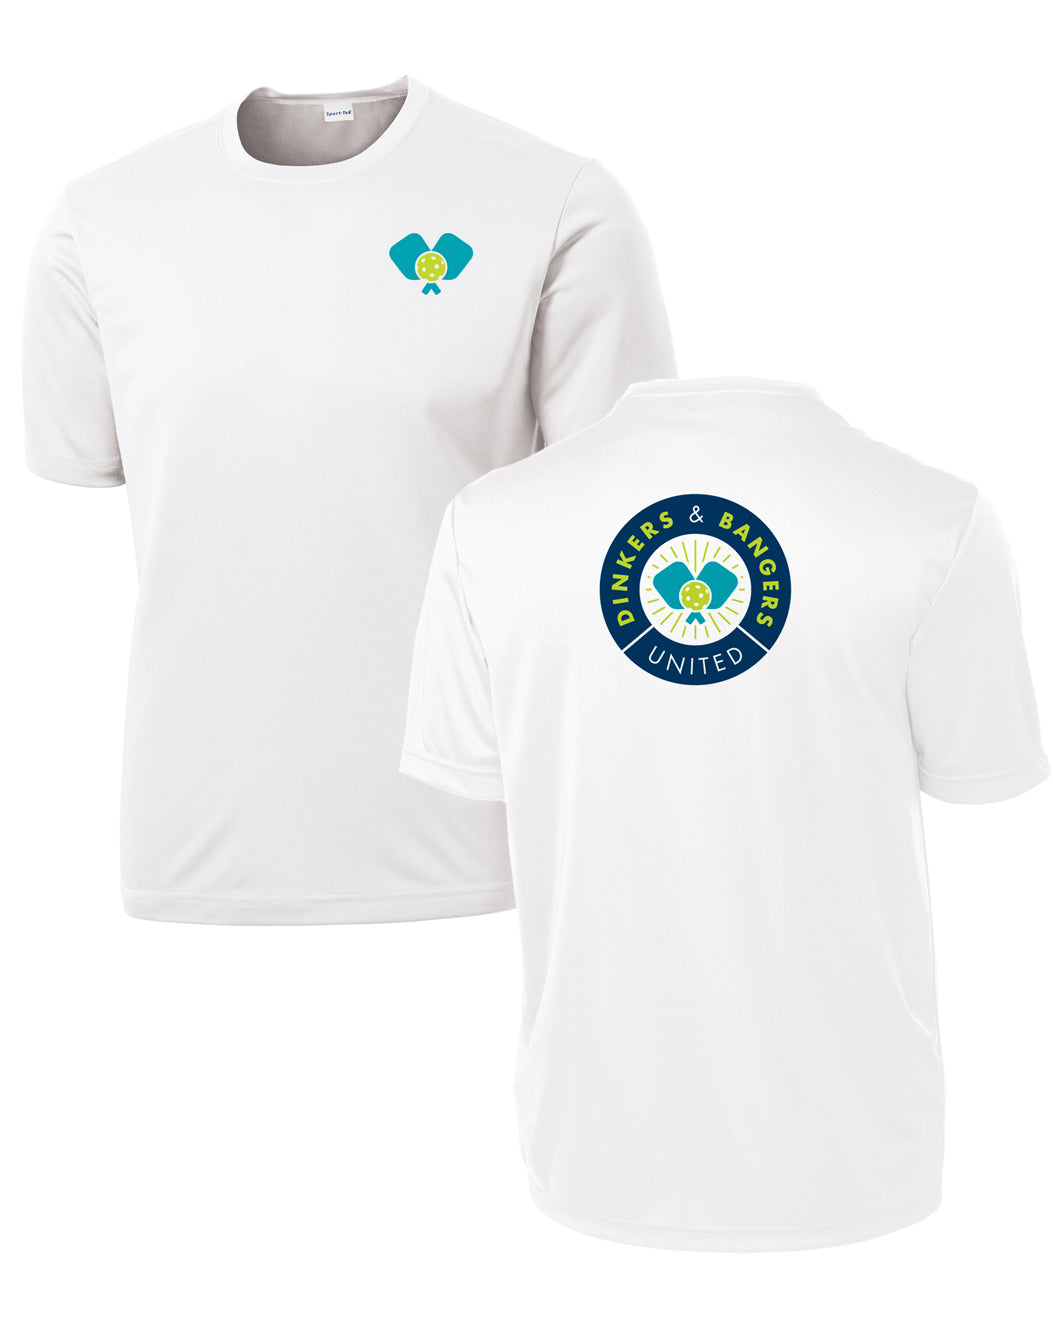 Dinkers & Bangers United - Performance Pickleball Tee - Two sided